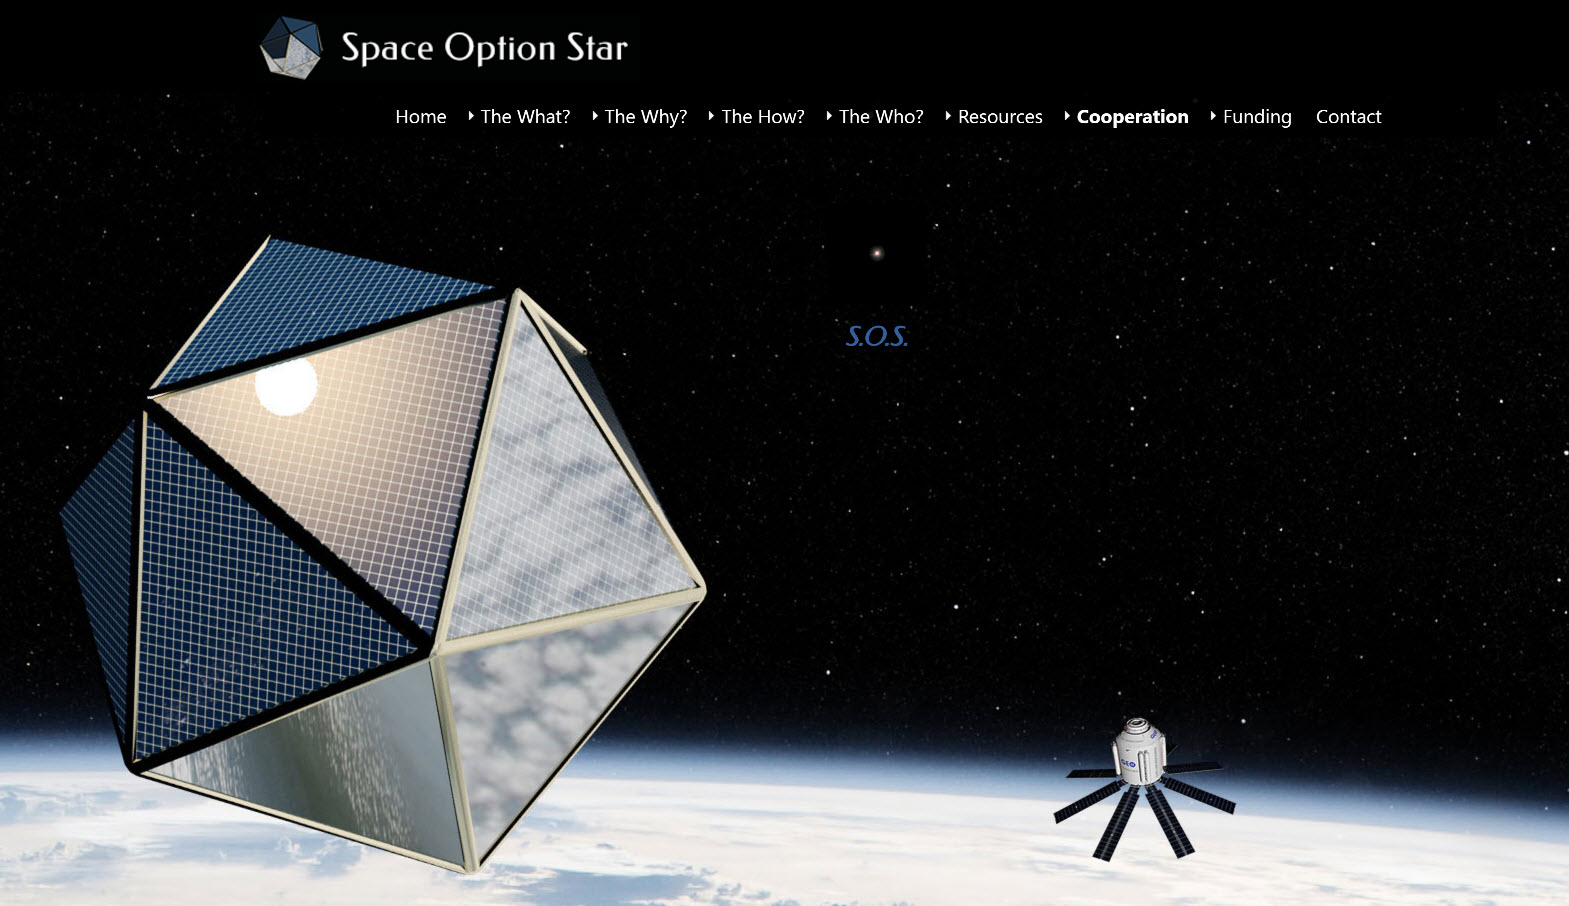 Space Option Star